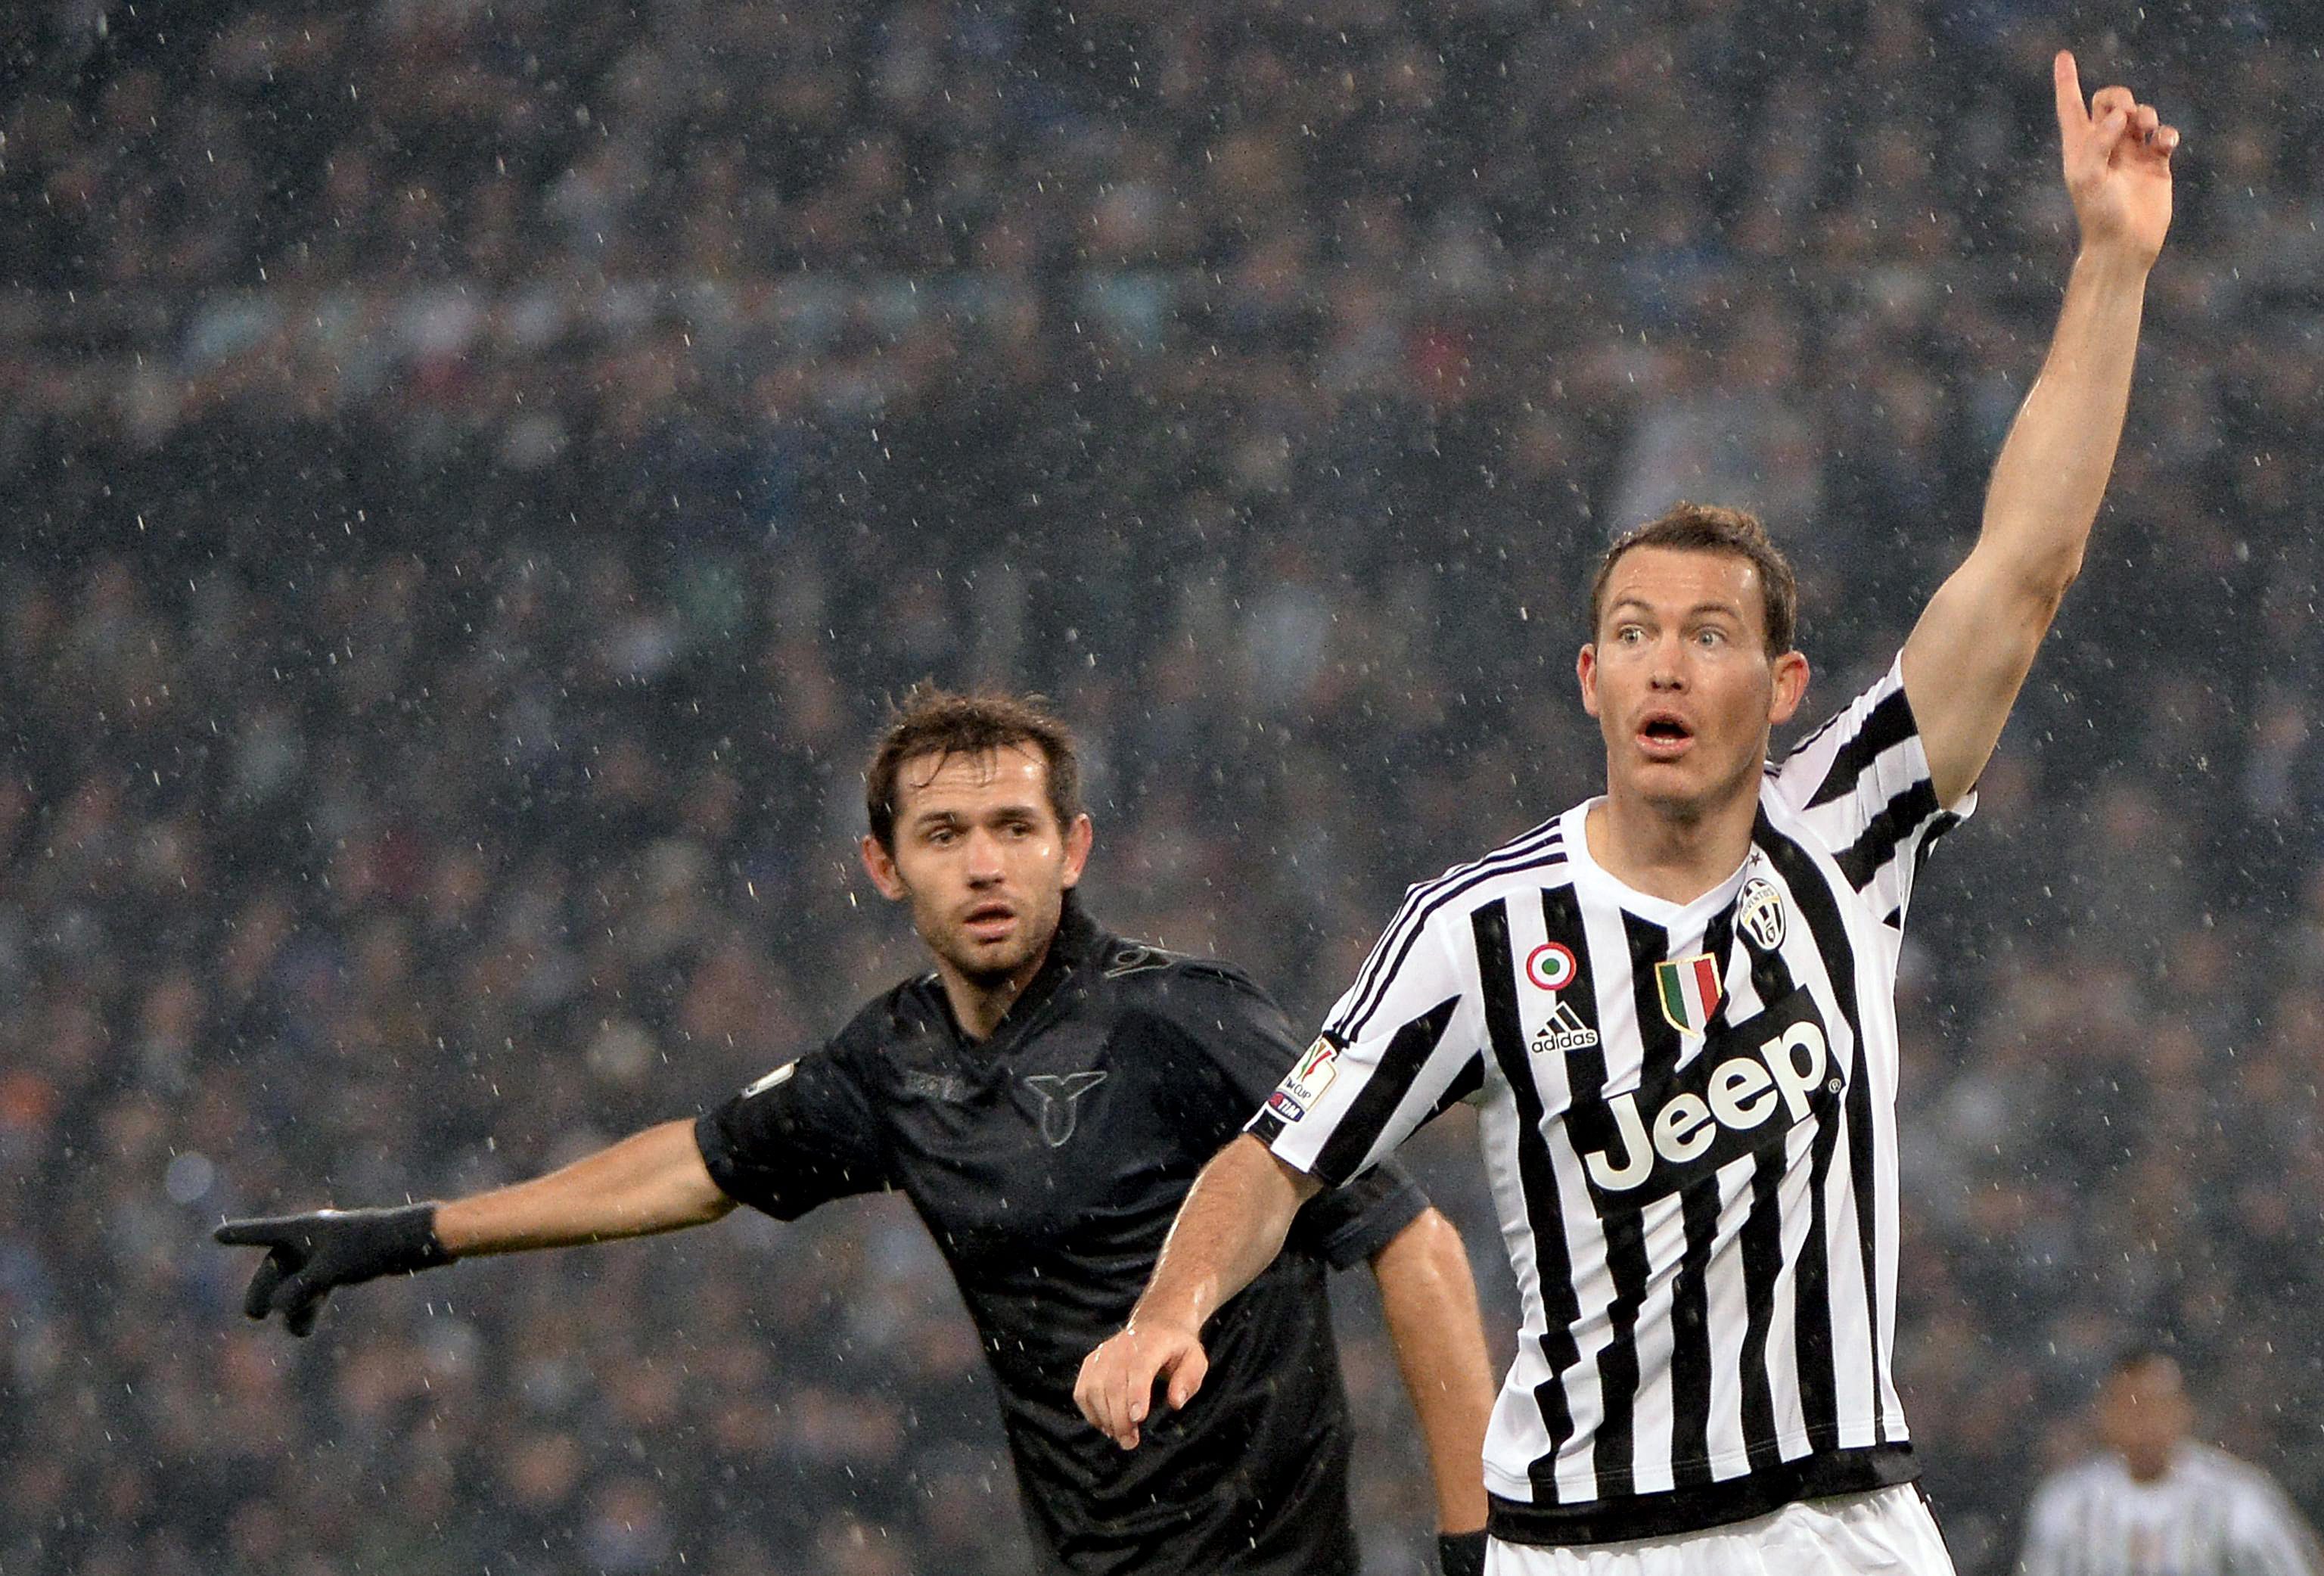 Stephan Lichtsteiner could also sign for Arsenal on a free transfer. (Photo courtesy: AFP/Getty)